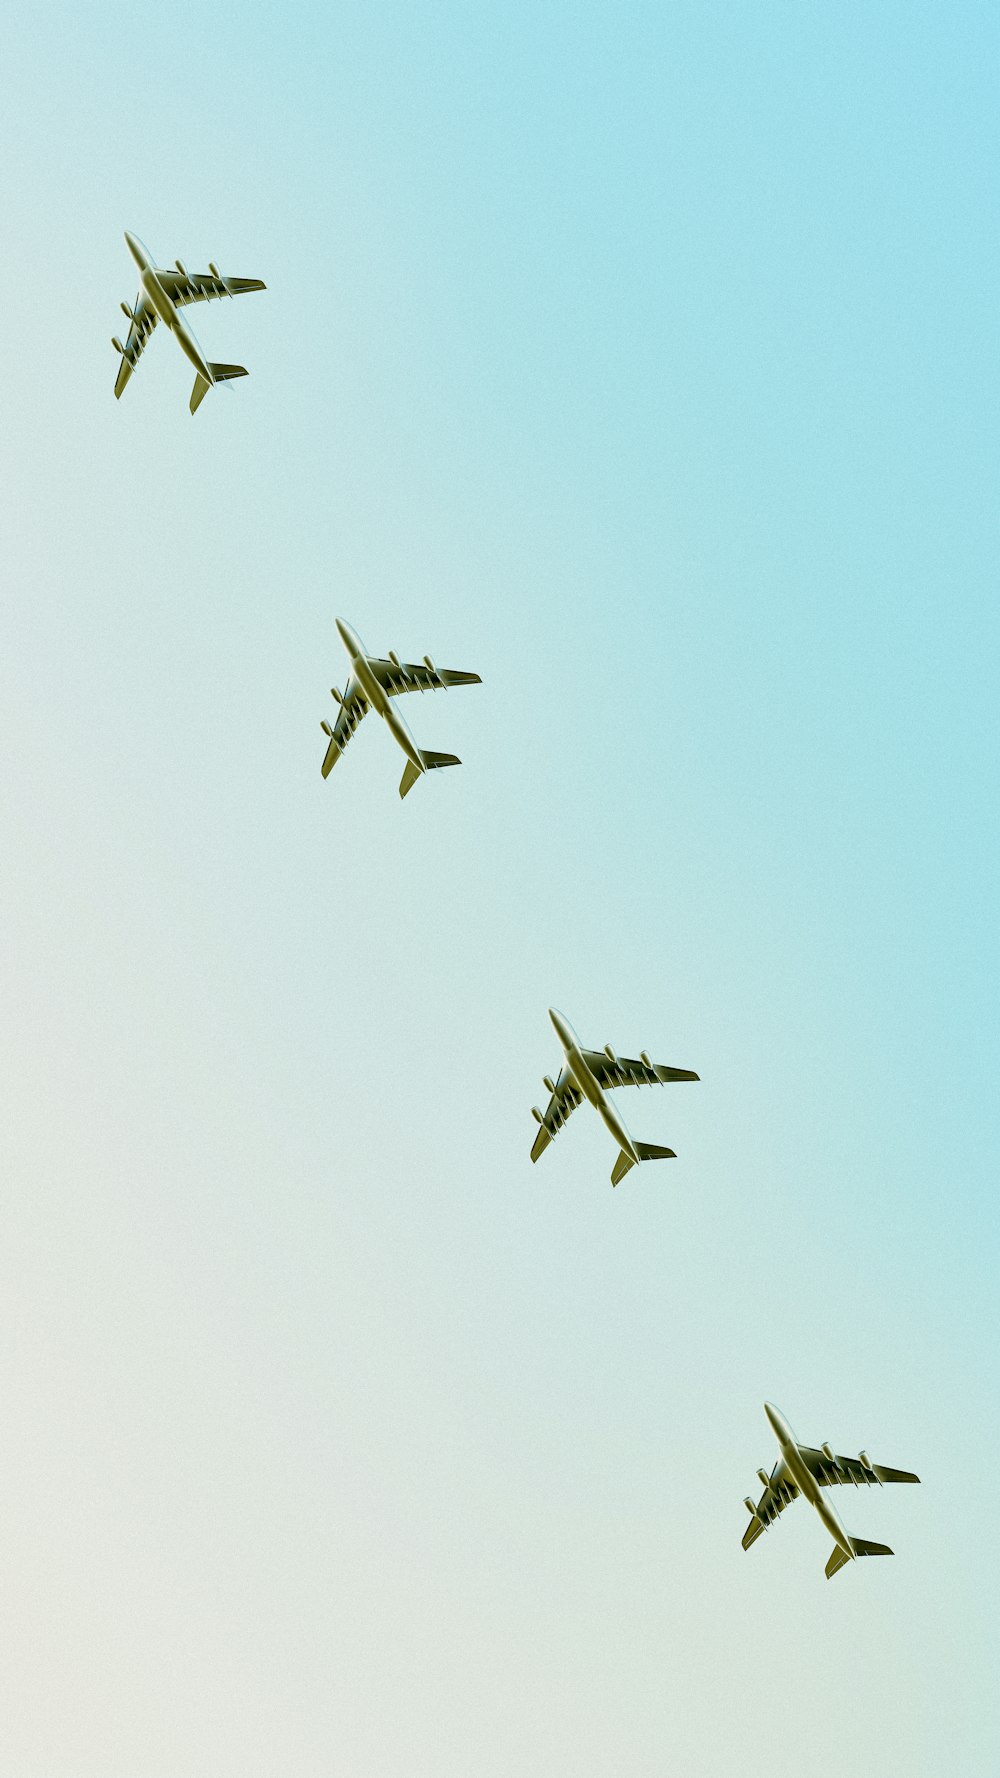 four airplanes flying in formation in the sky